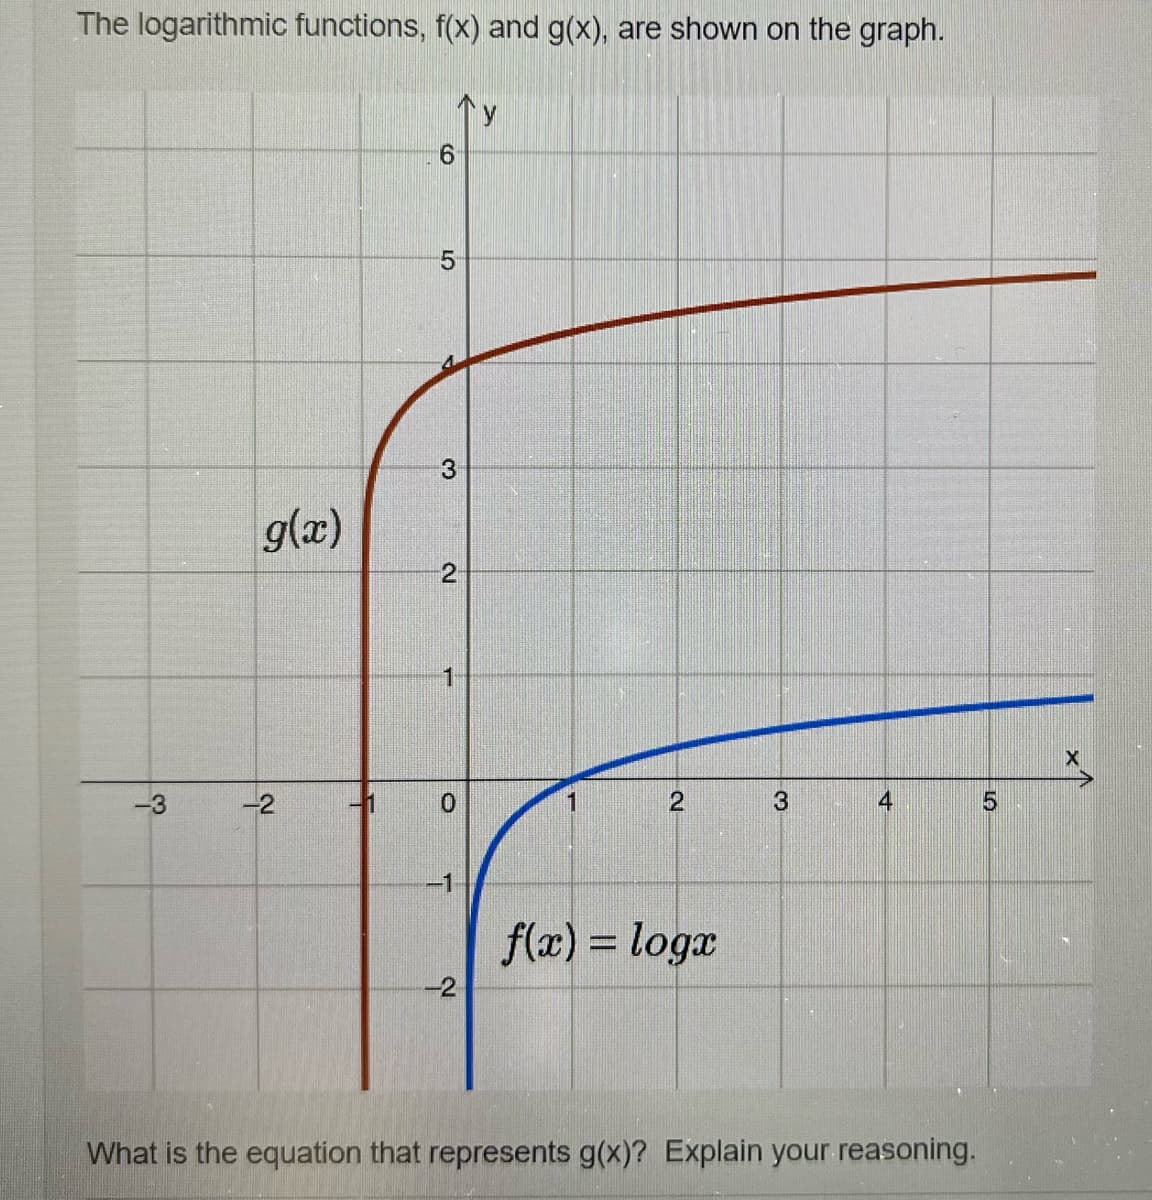 The logarithmic functions, f(x) and g(x), are shown on the graph.
g(x)
-2
1
6
5
3
2
T
0
-2
1
2
f(x) = logx
3
4
What is the equation that represents g(x)? Explain your reasoning.
5